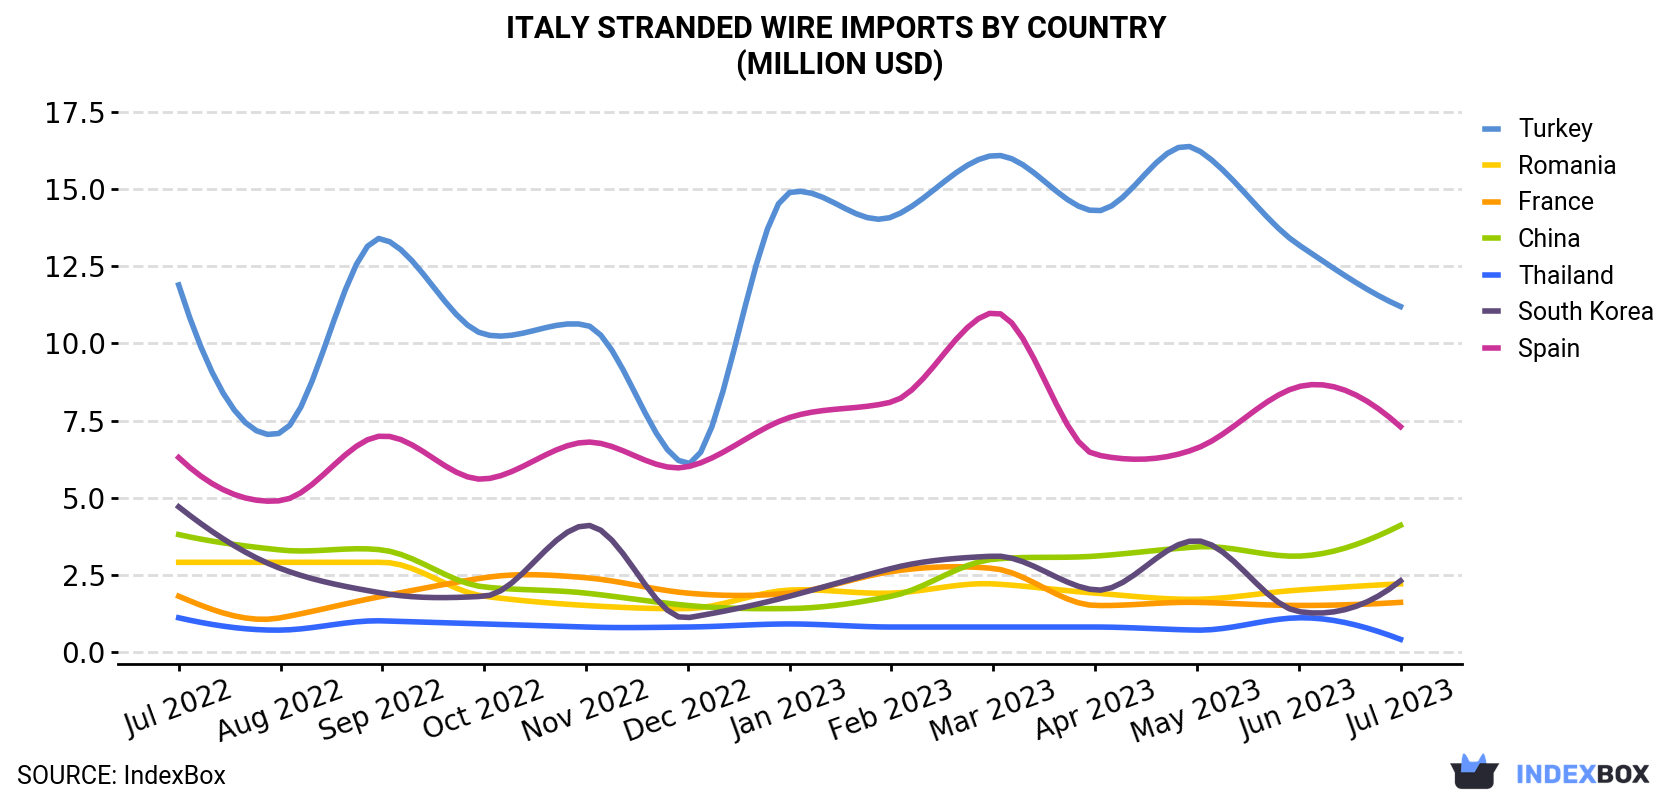 Italy Stranded Wire Imports By Country (Million USD)